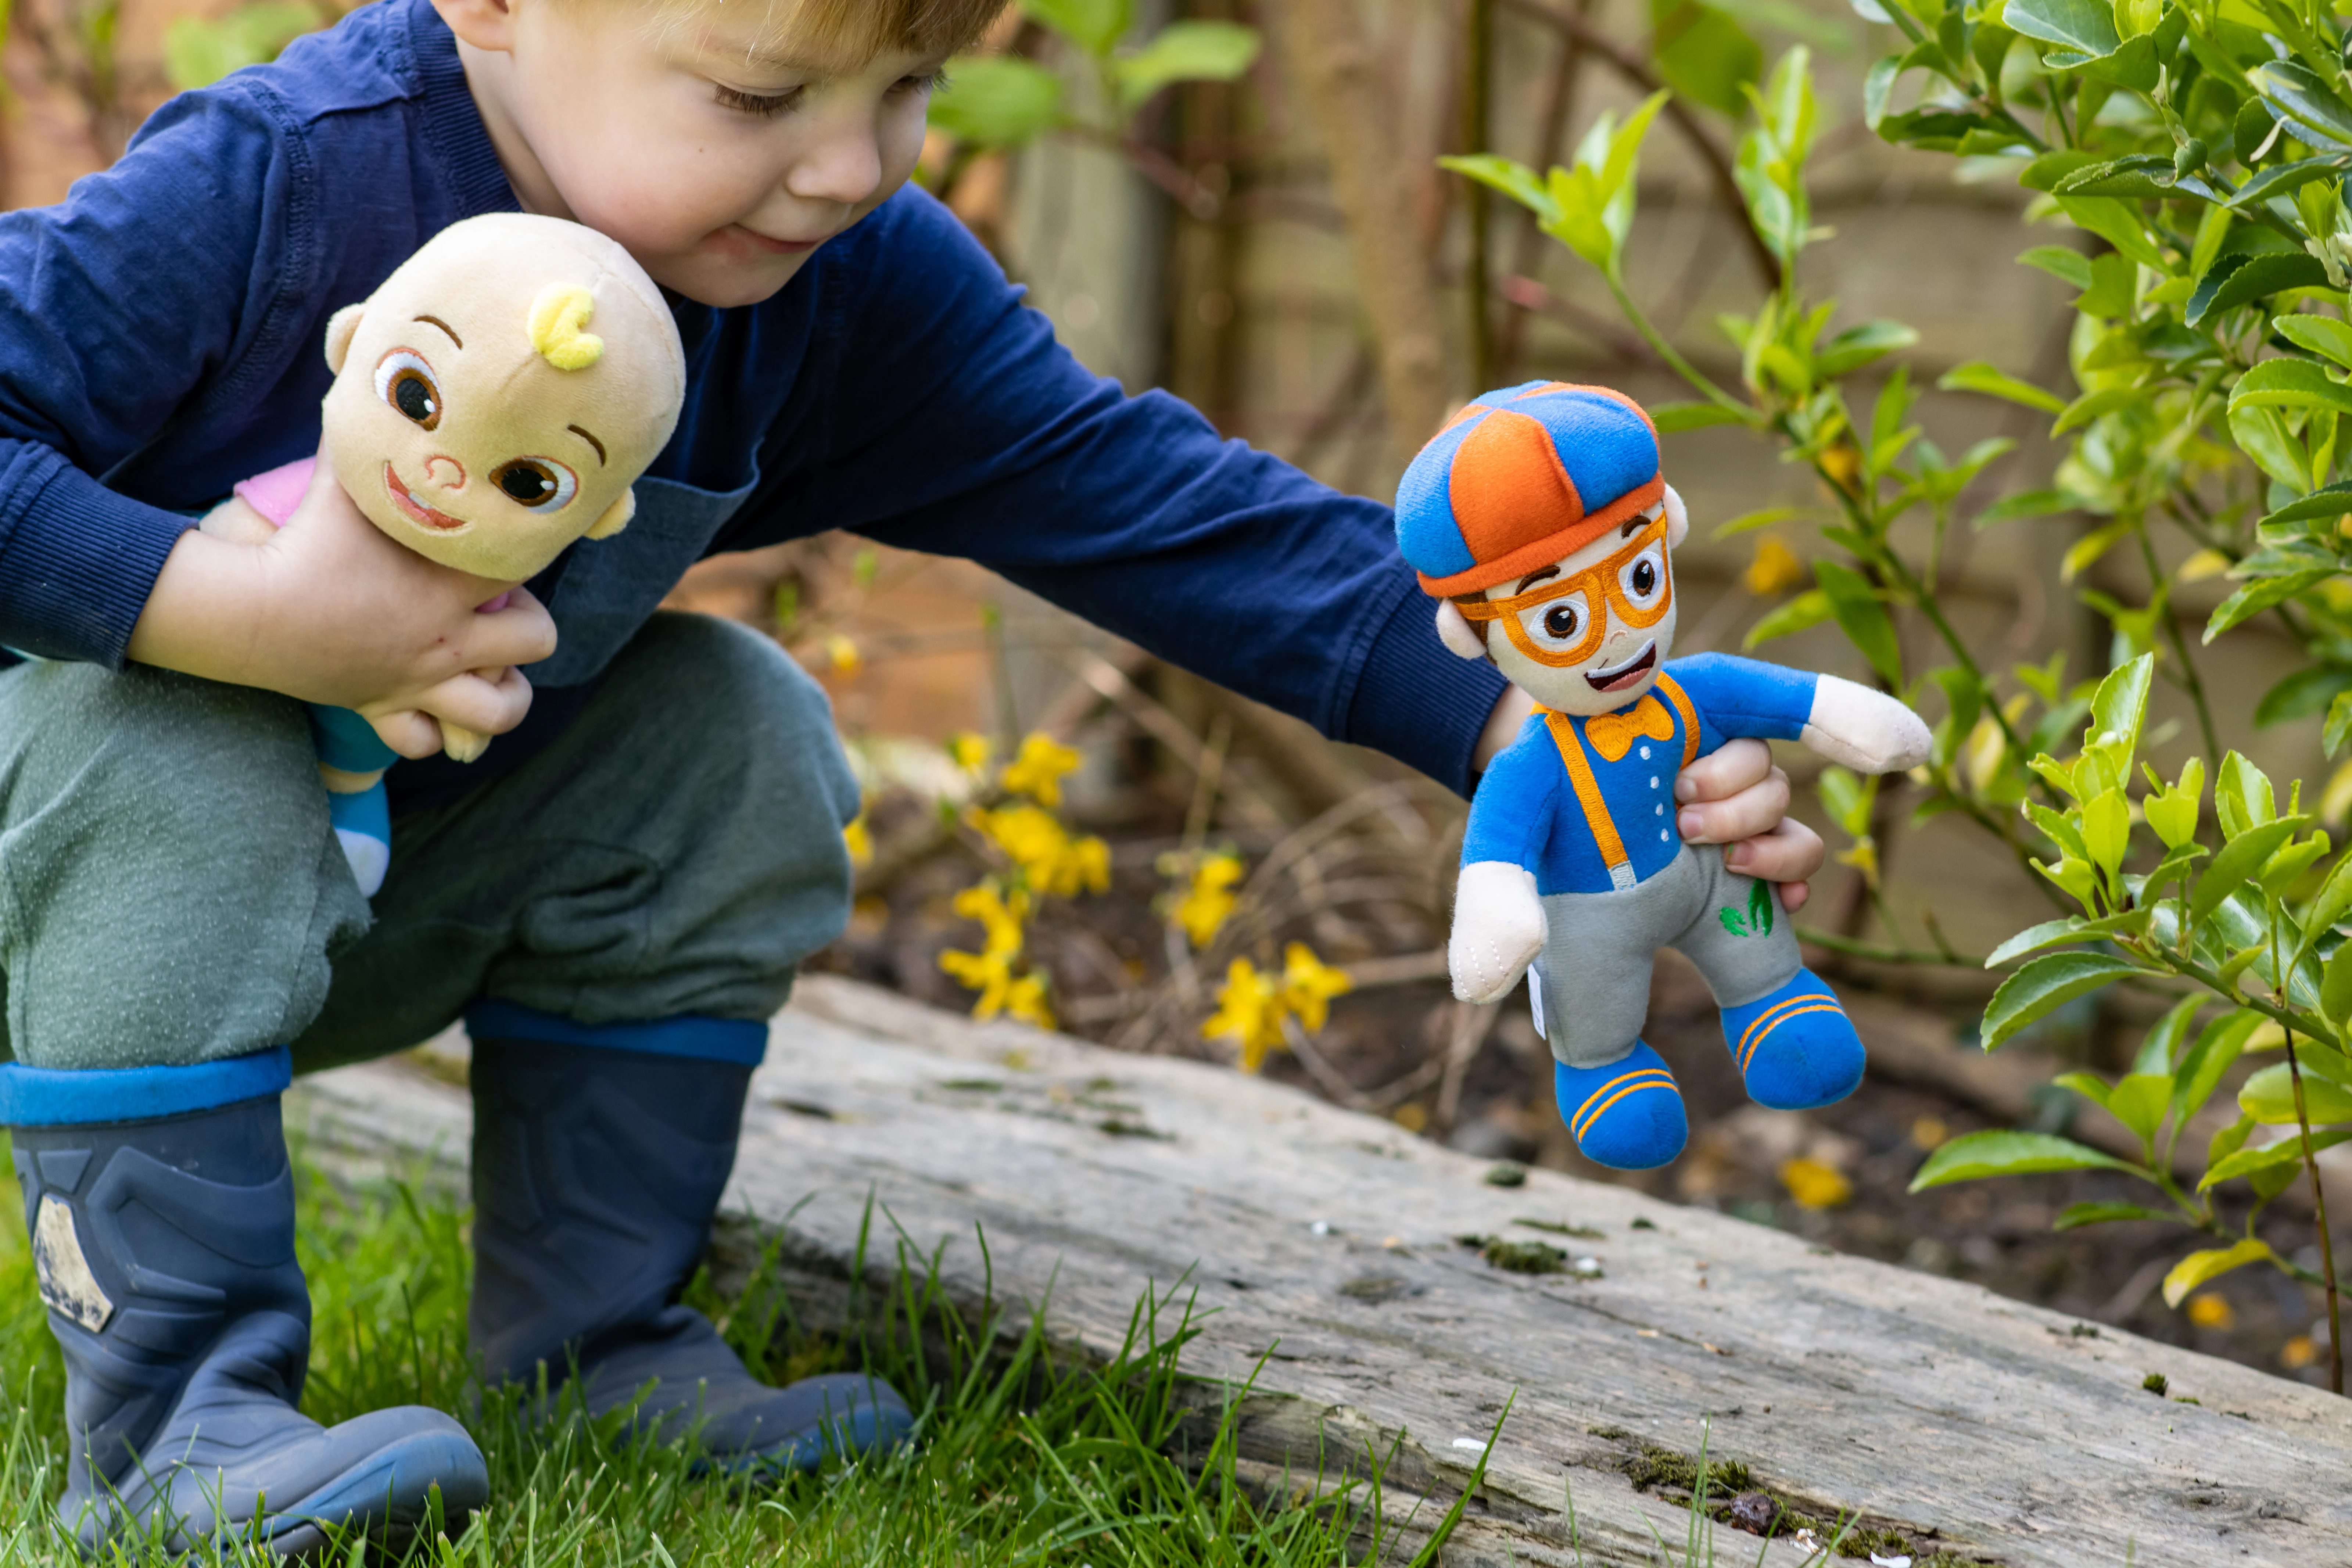 A preschooler in the garden with two plush toys: Blippi and JJ from CoComelon